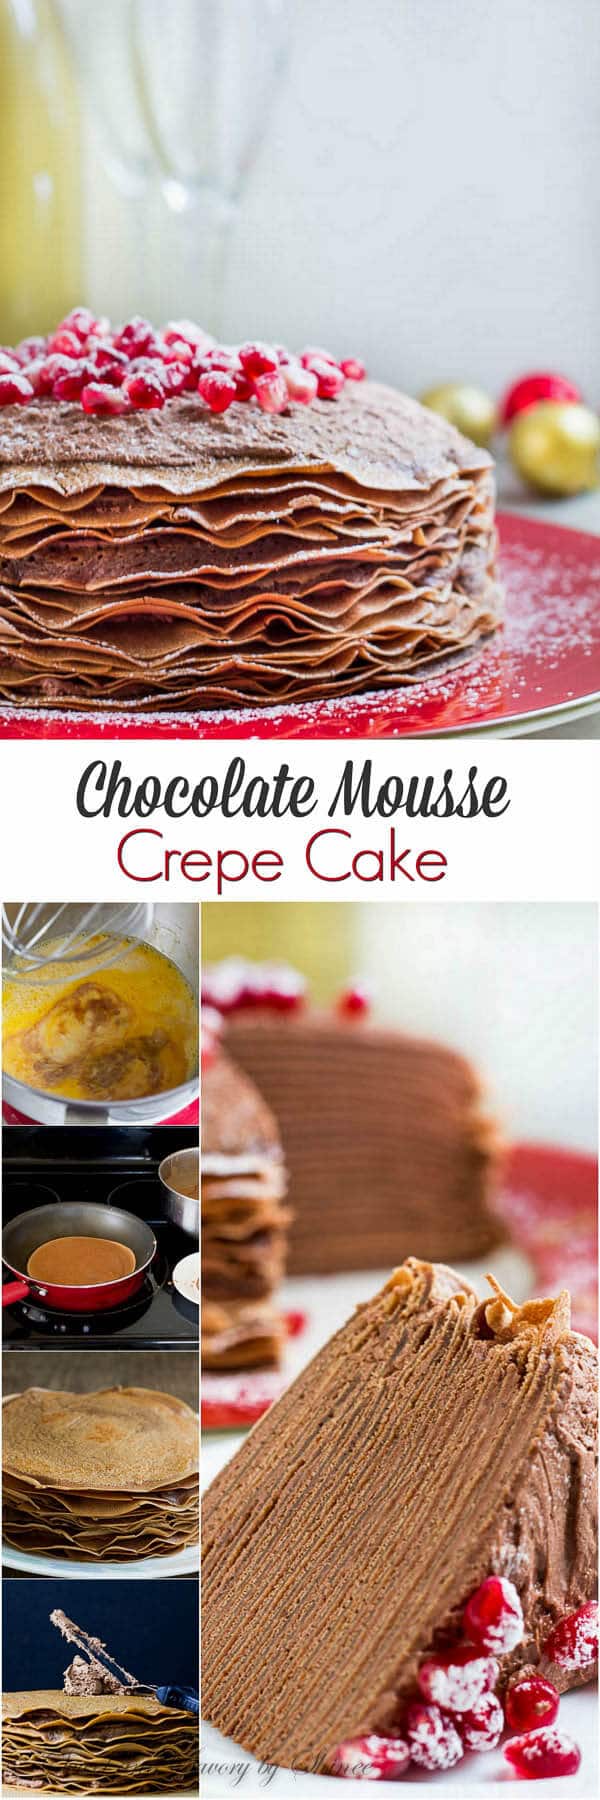 This beautiful chocolate mousse crepe cake is made of 20+ layers of delicate chocolate crepes filled with rich chocolate mousse filling and topped with festive red pomegranates.